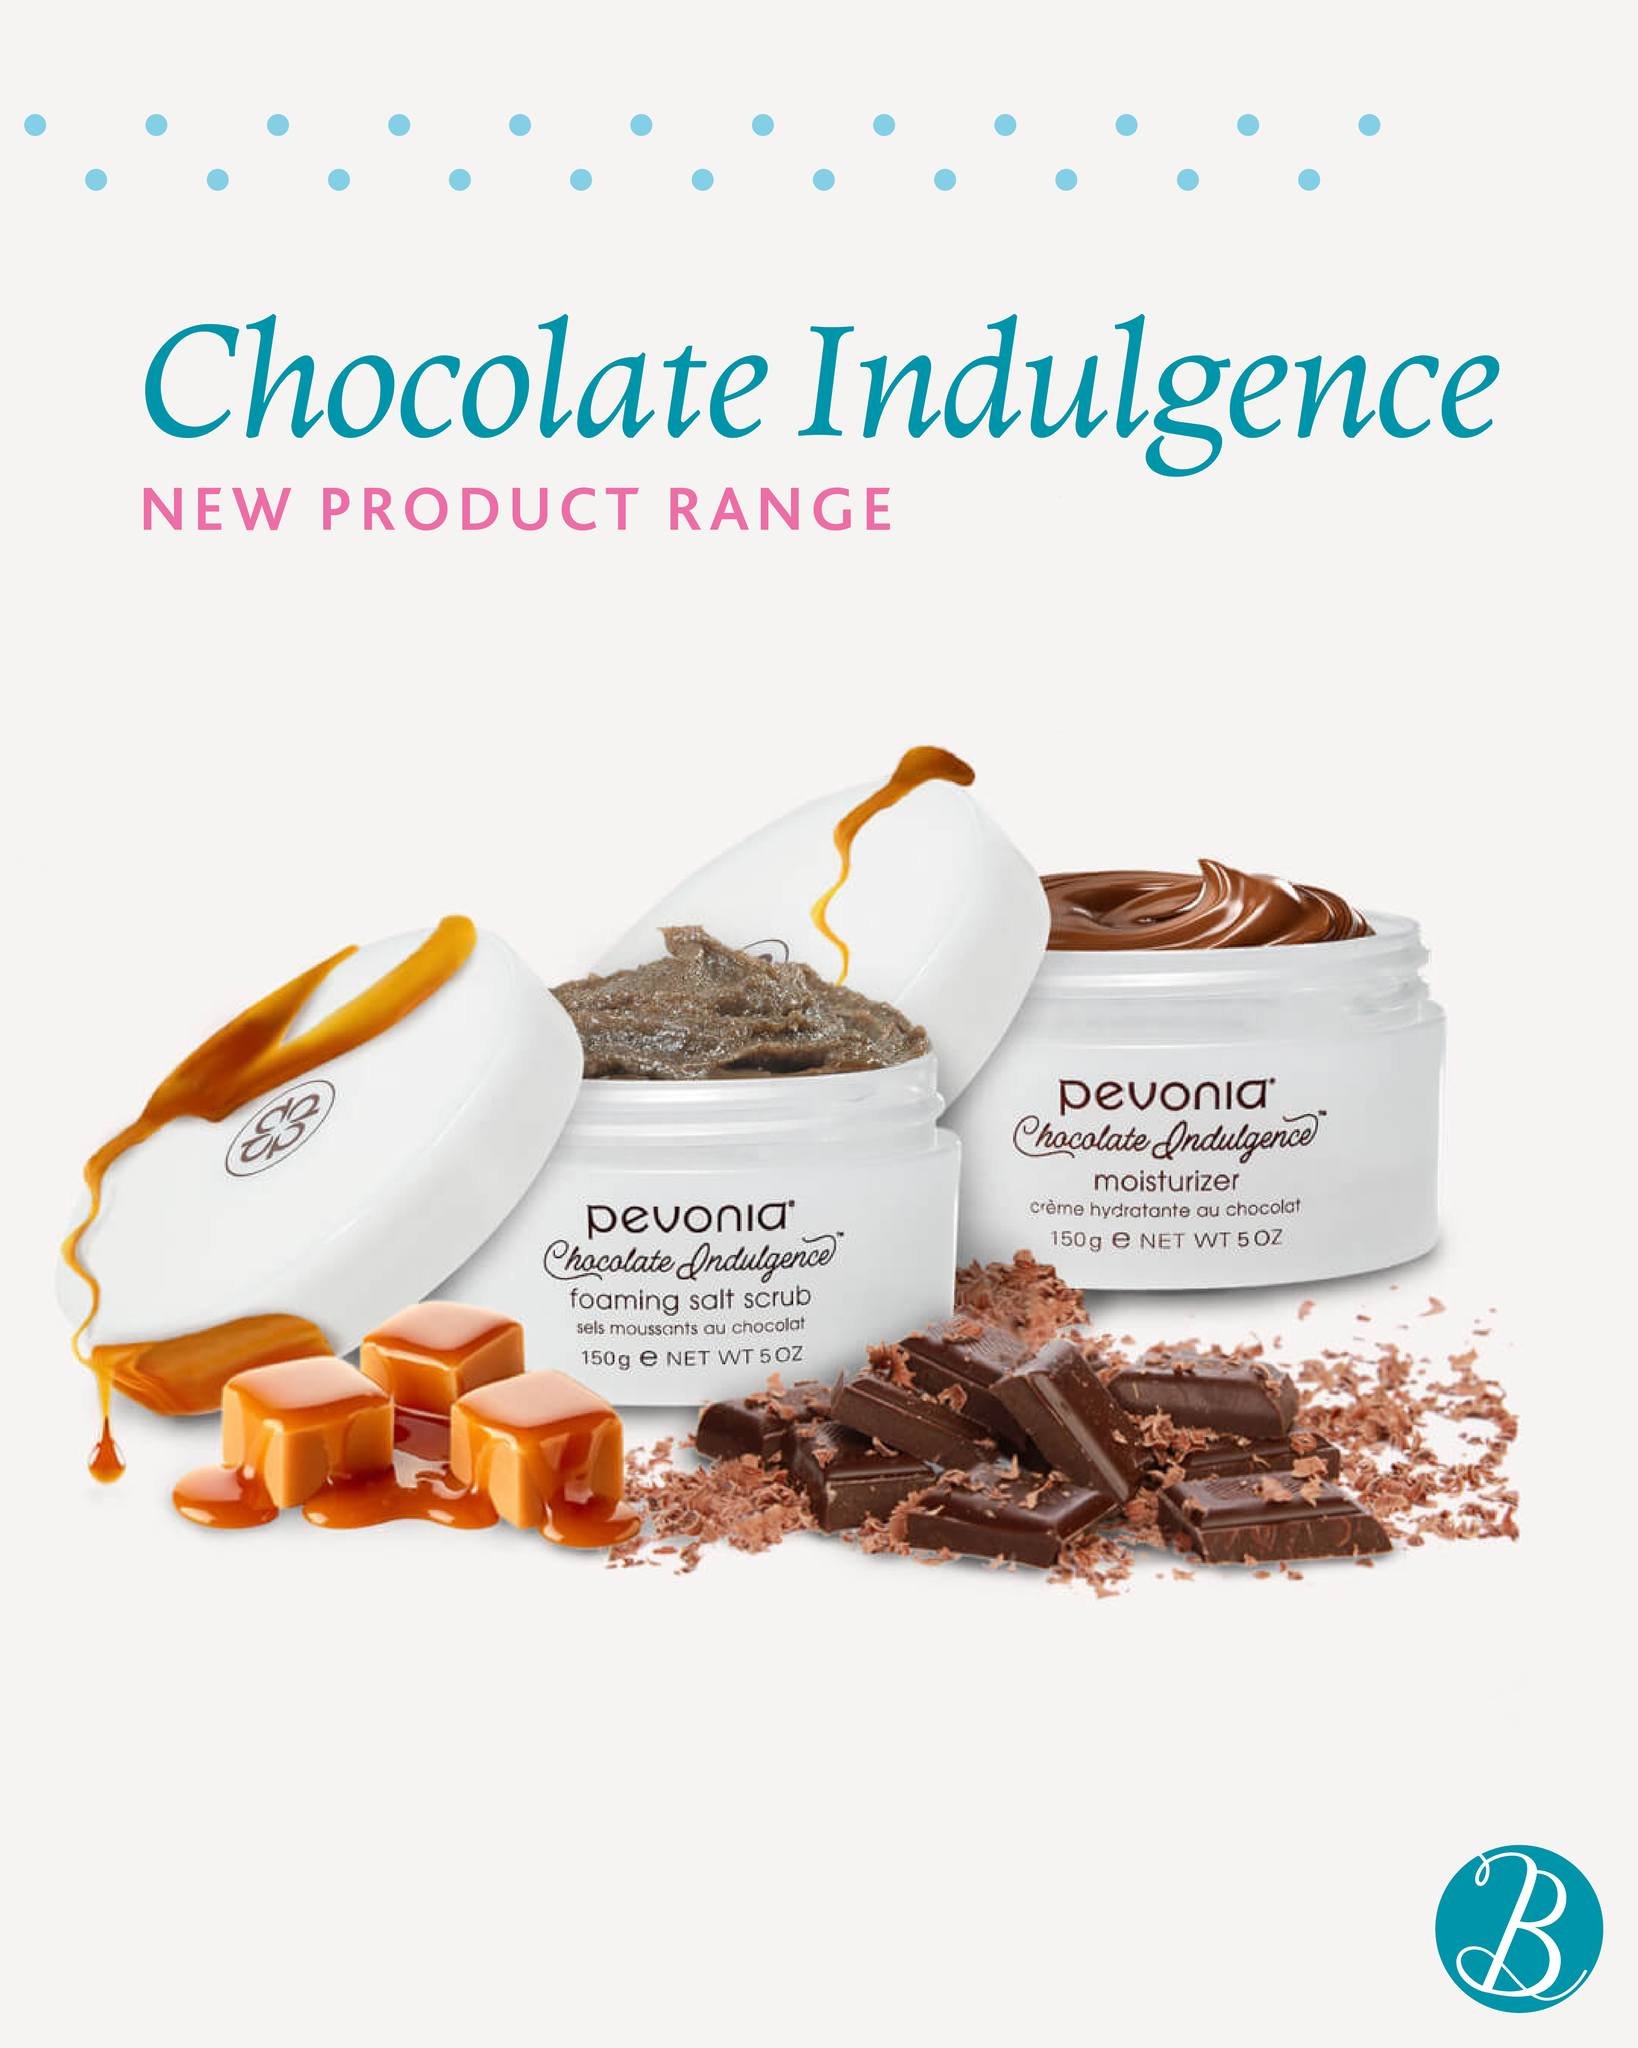 Calling all chocolate lovers! Have you seen the new Pevonia Chocolate Indulgence Collection?

Lavish your face and body in the rejuvenating chocolate moisturiser and salt scrub as you inhale the enticing aroma of sumptuous Cacao.

The perfect alterna